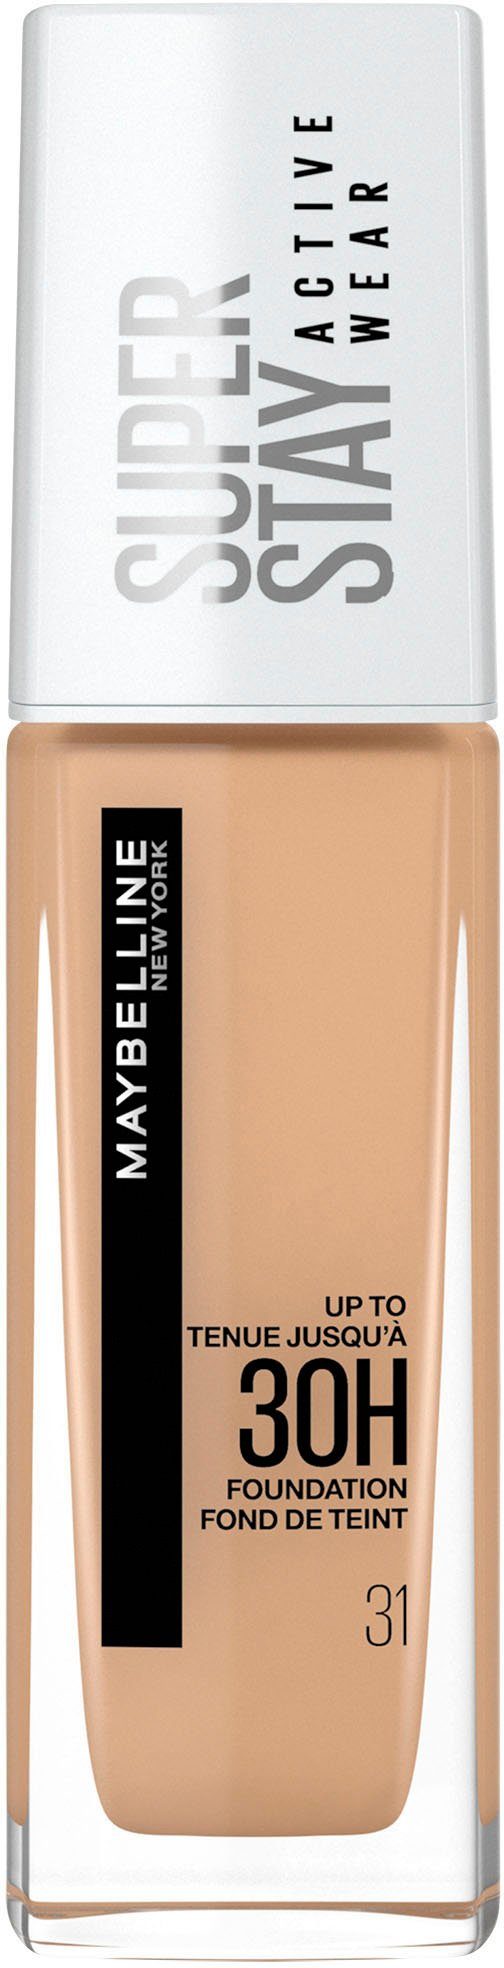 MAYBELLINE Wear NEW 31 Foundation Stay Warm Active YORK Nude Super